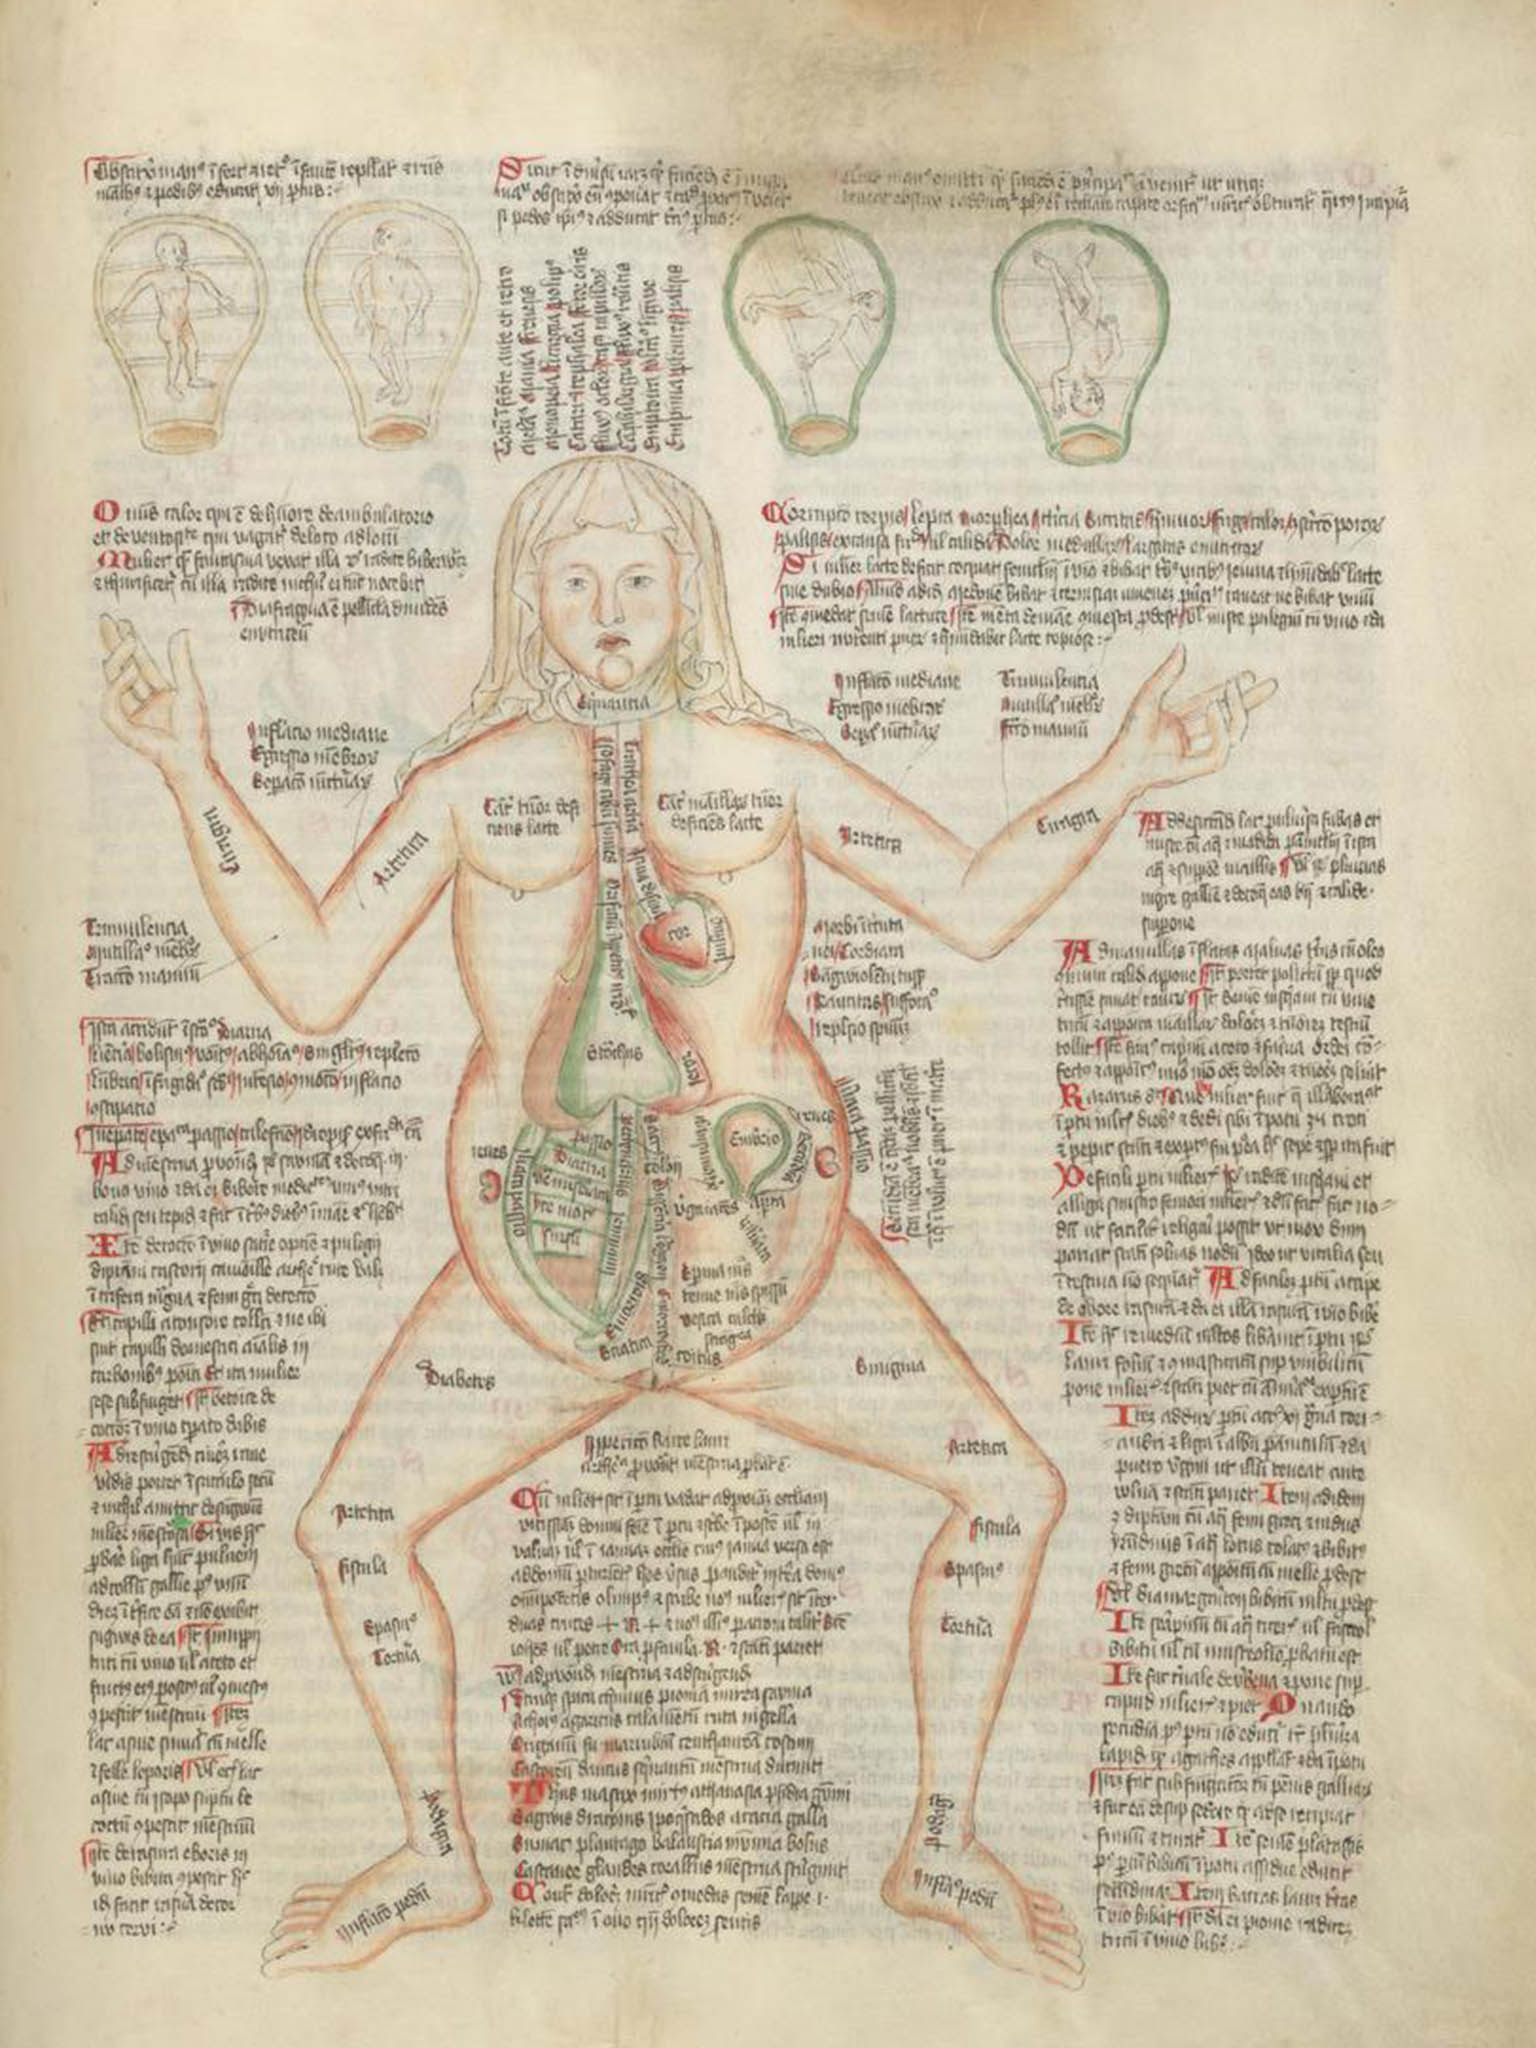 The ‘Disease Woman’ according to 15th century physicians